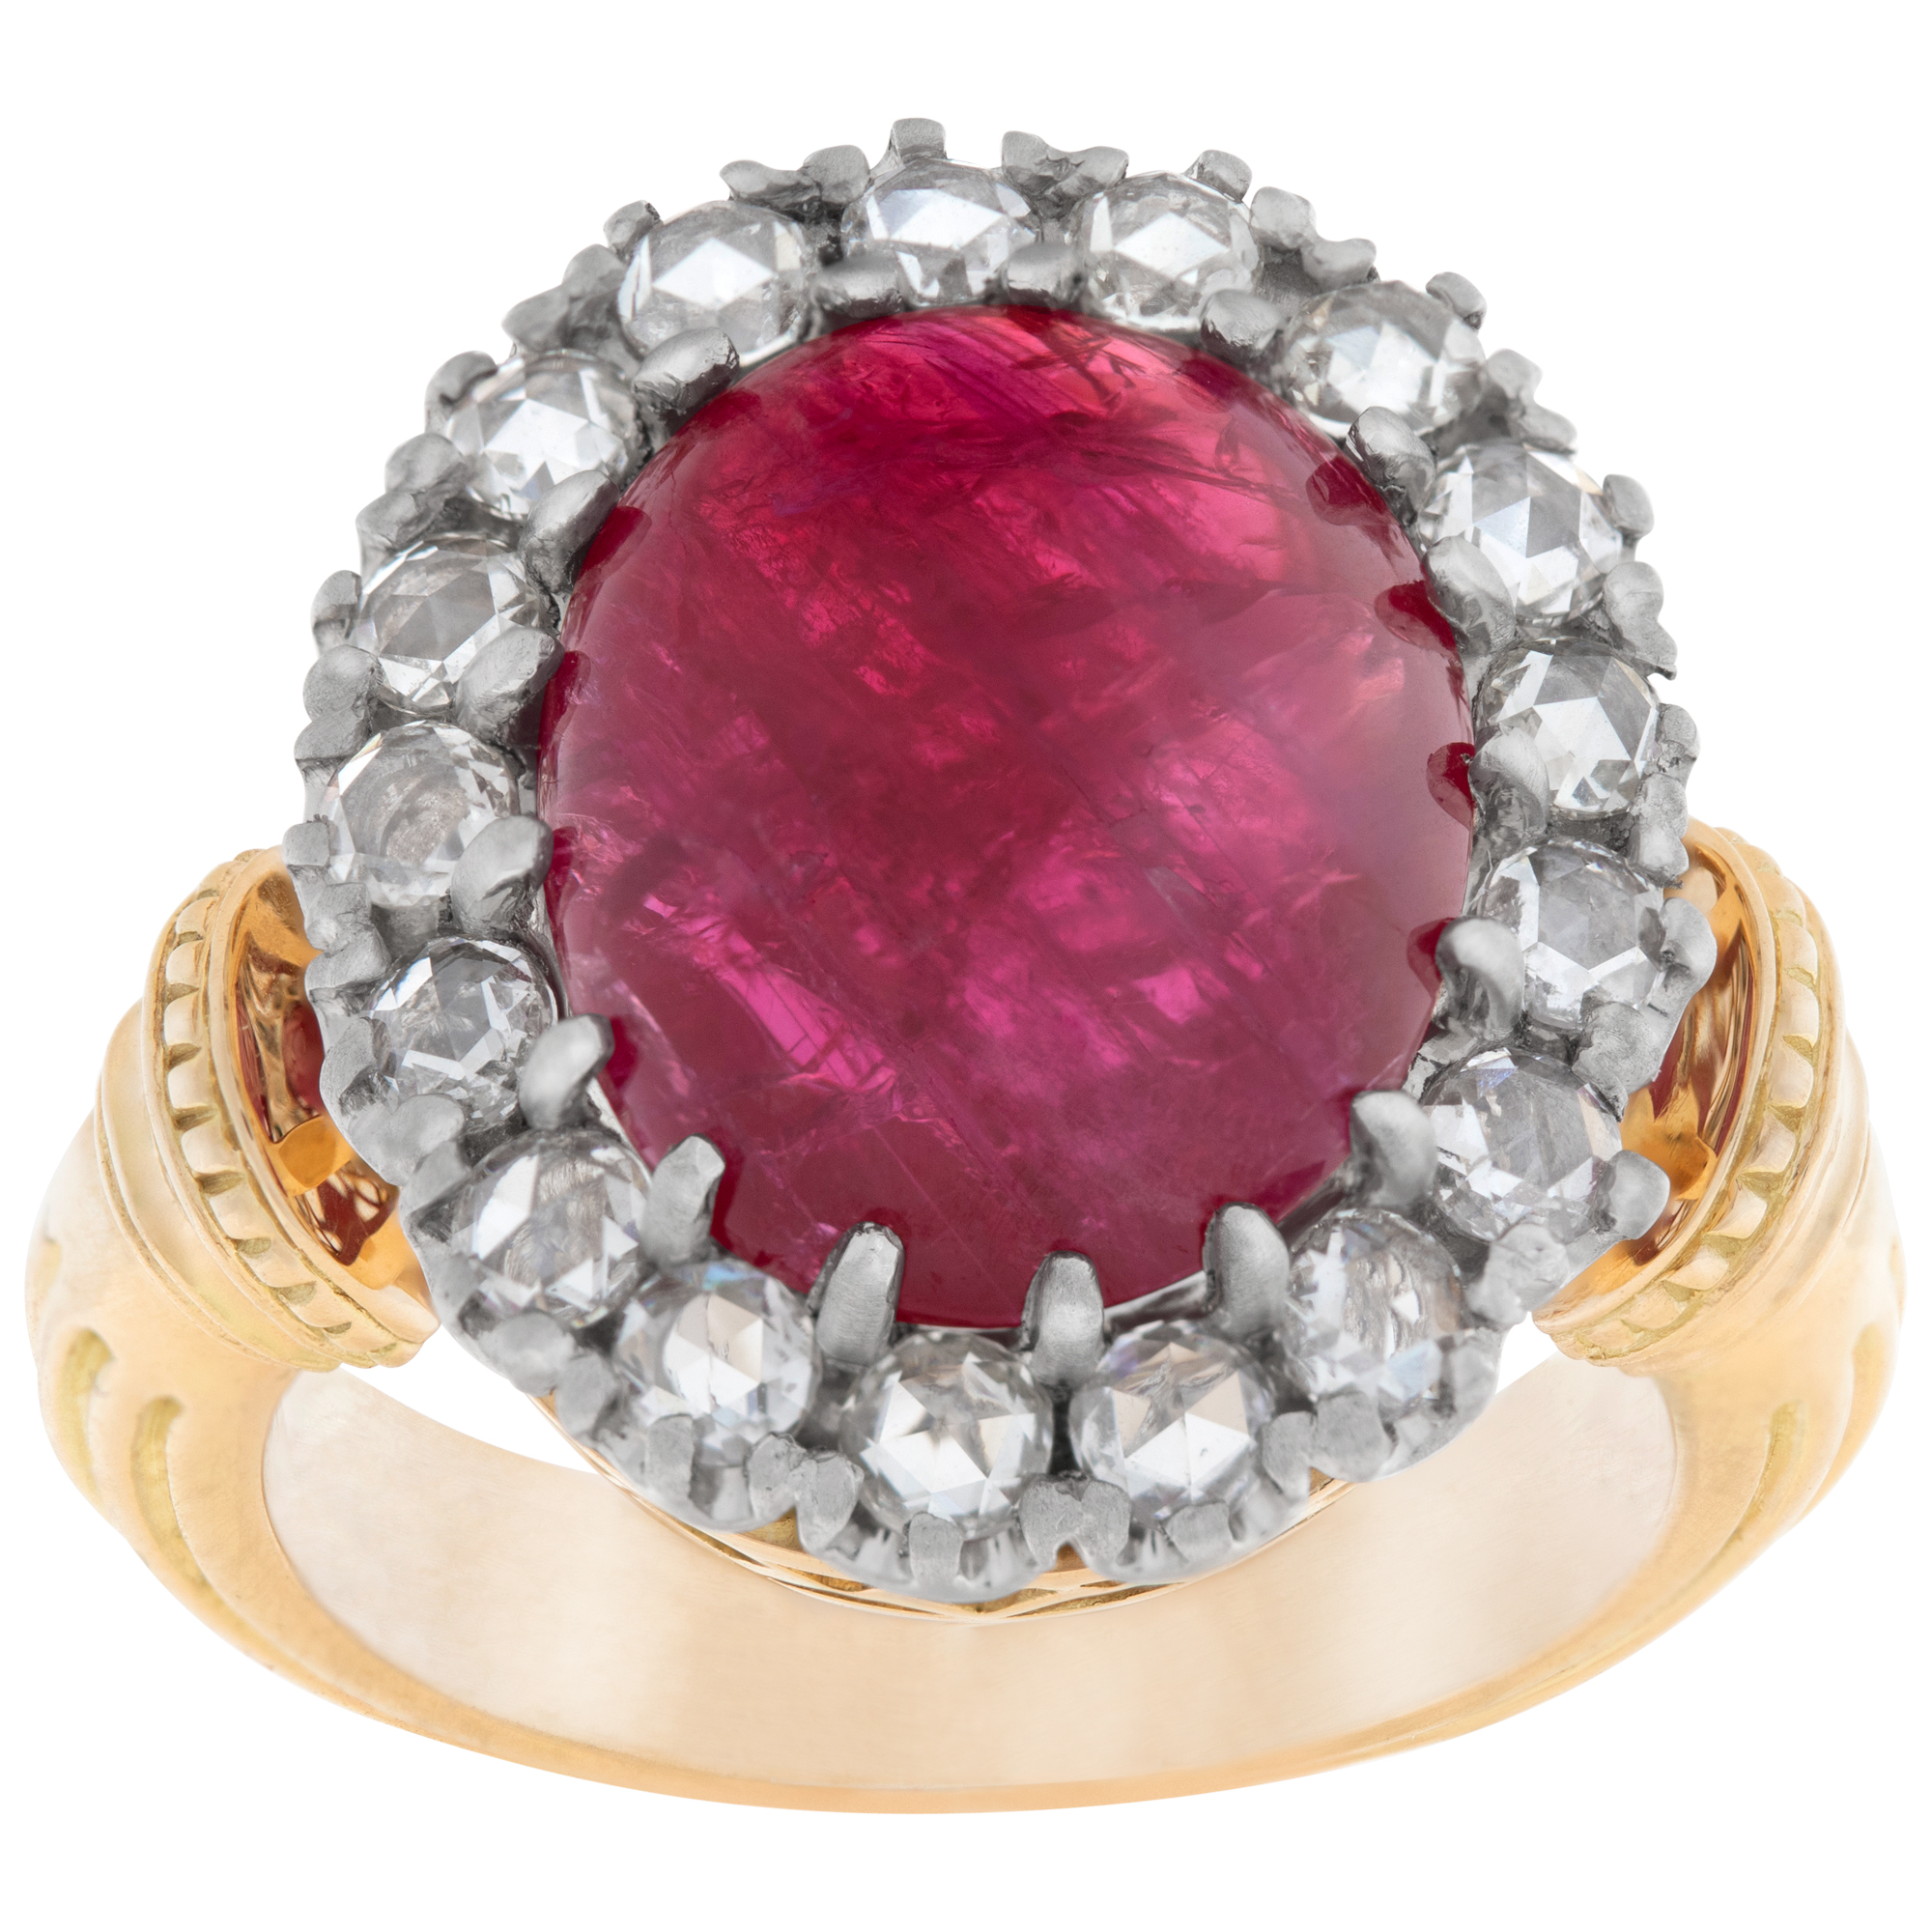 Cabochon Burma Ruby with diamond halo ring set in 18k yellow gold